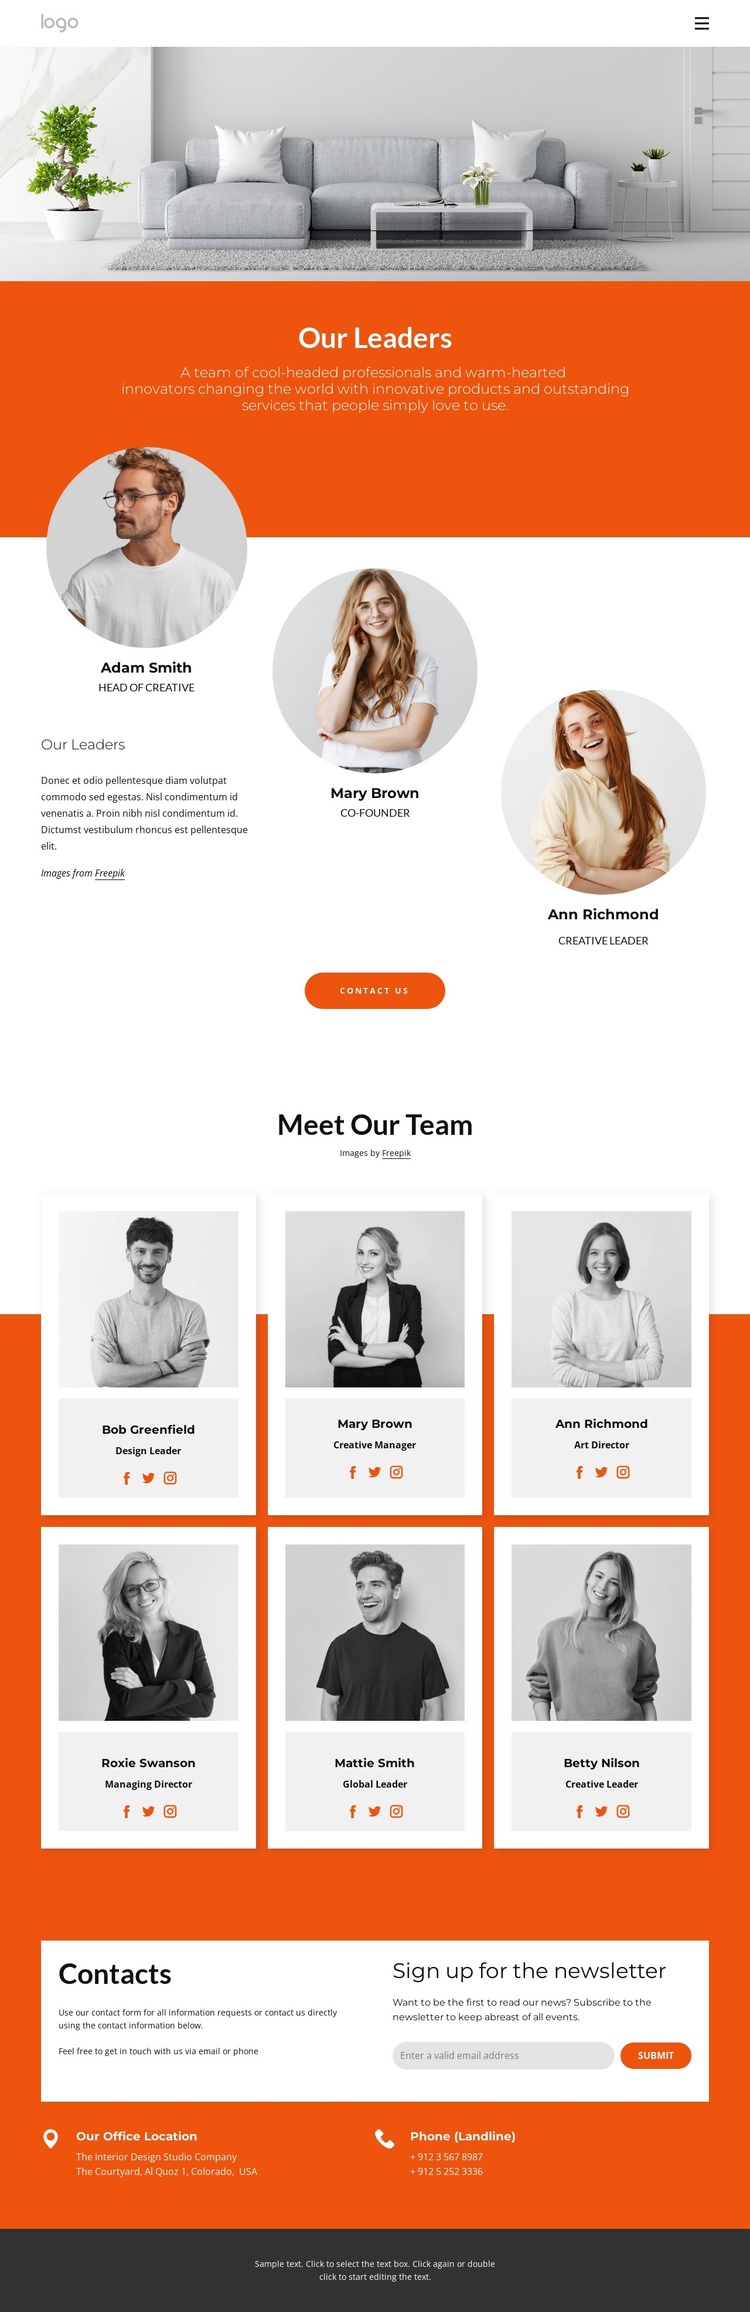 Our great team Joomla Template